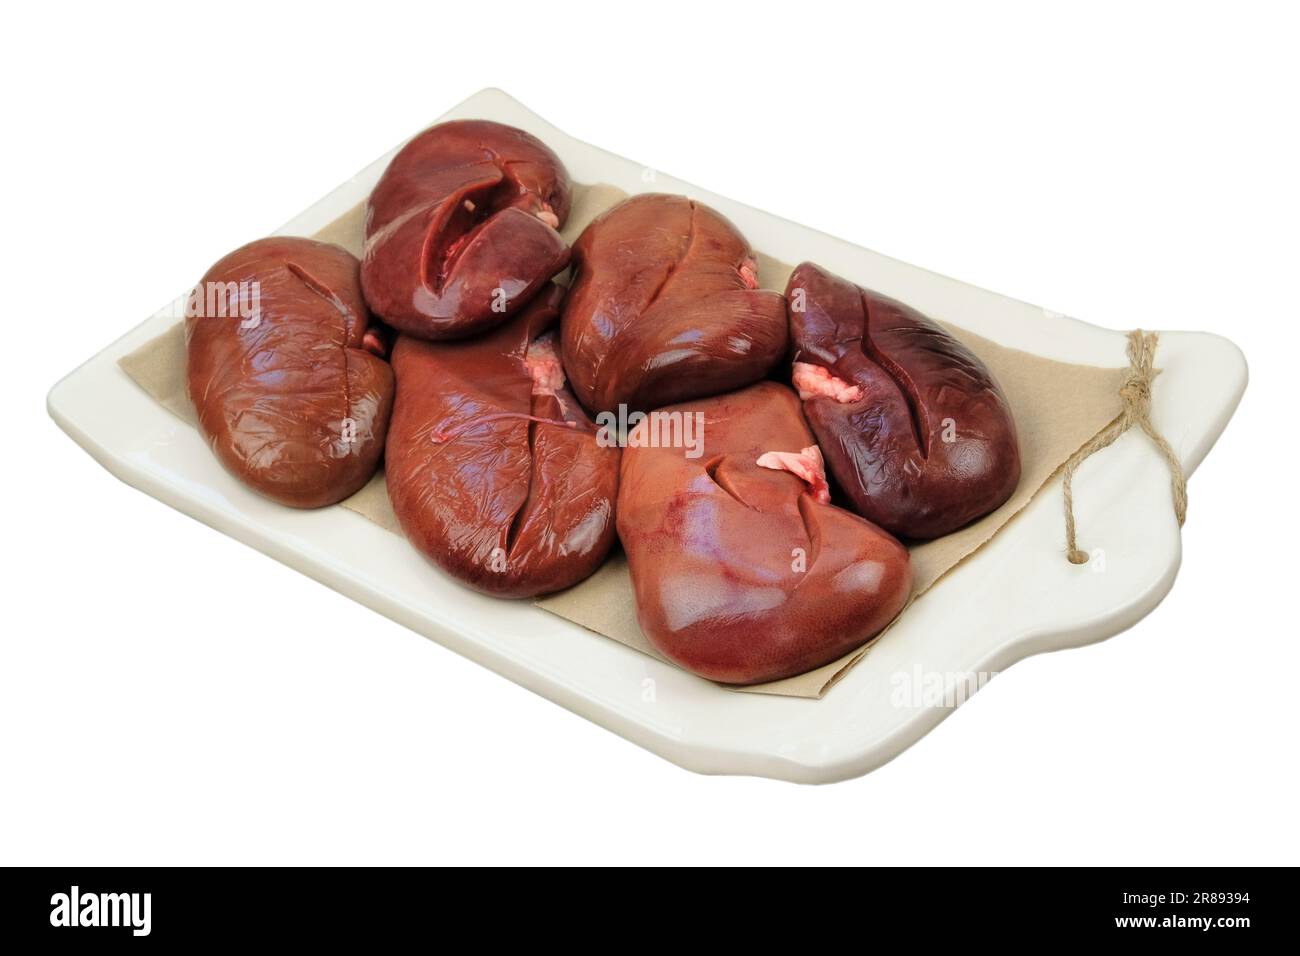 Pork kidneys in board isolated on white background. Raw meat. Stock Photo